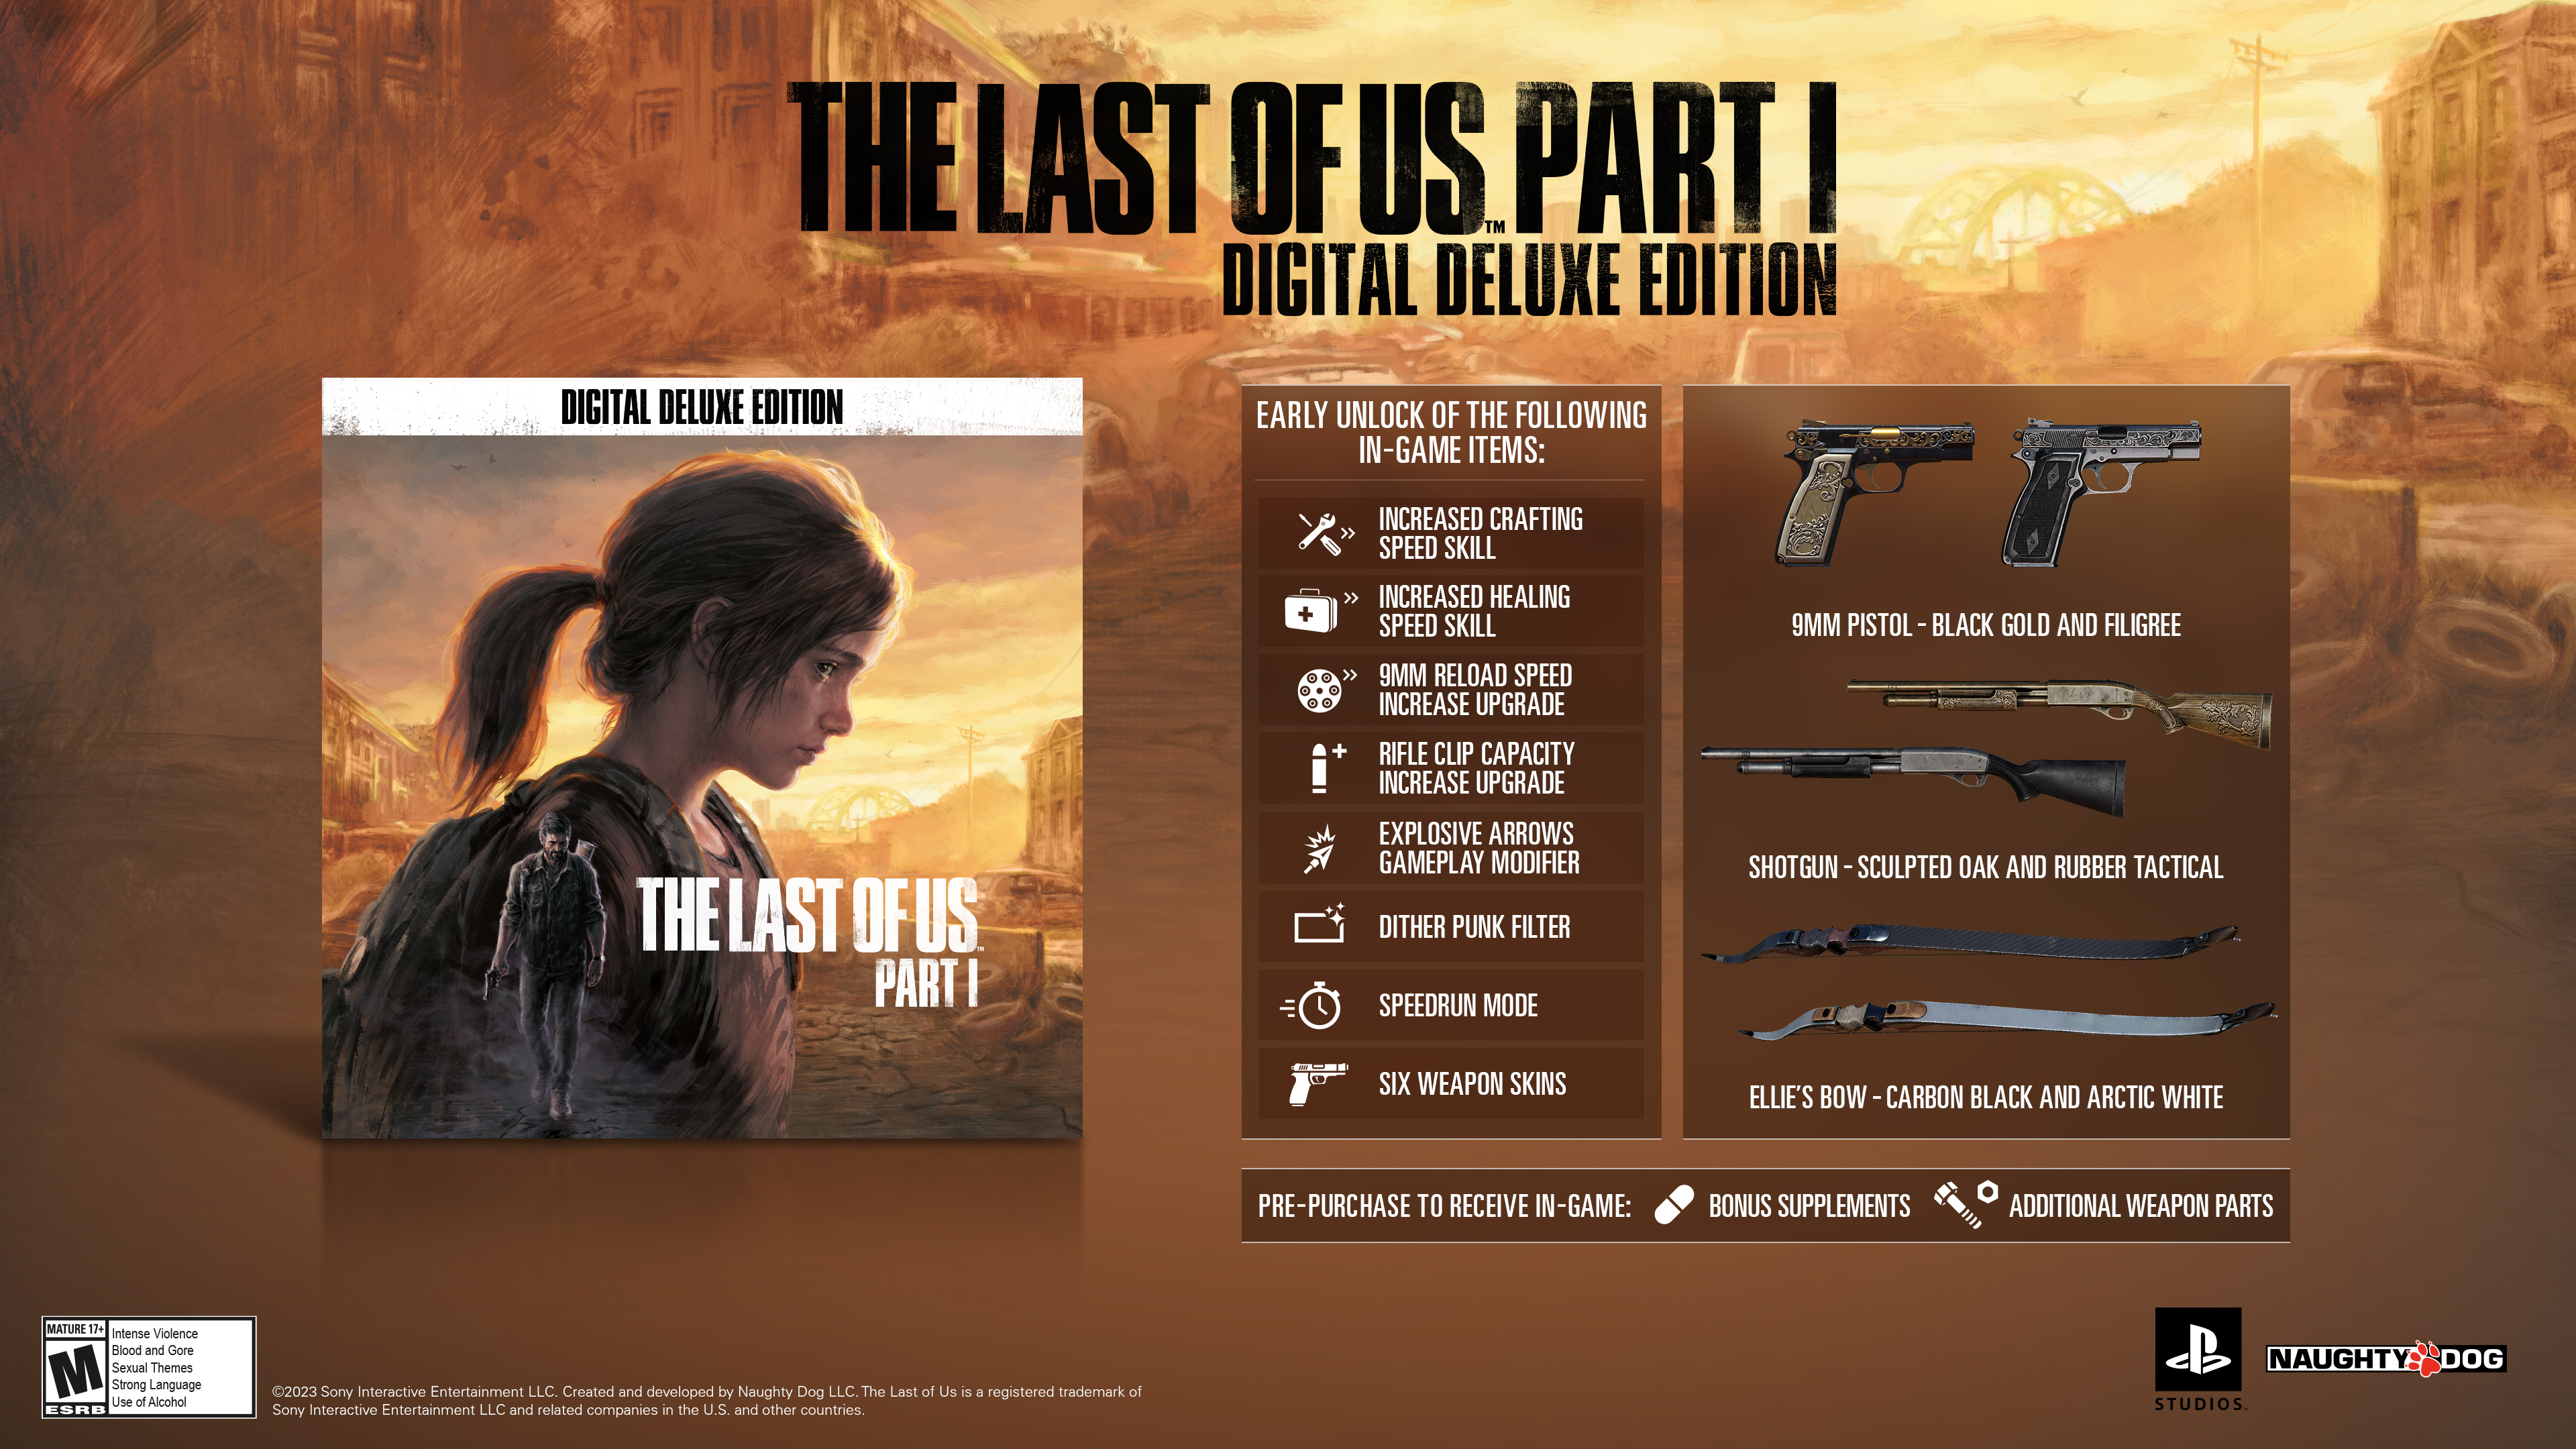 Naughty Dog on X: ONE WEEK until The Last of Us Part I debuts on PC!  There's still time to pre-purchase the Digital Deluxe edition, which comes  with early unlocks of in-game